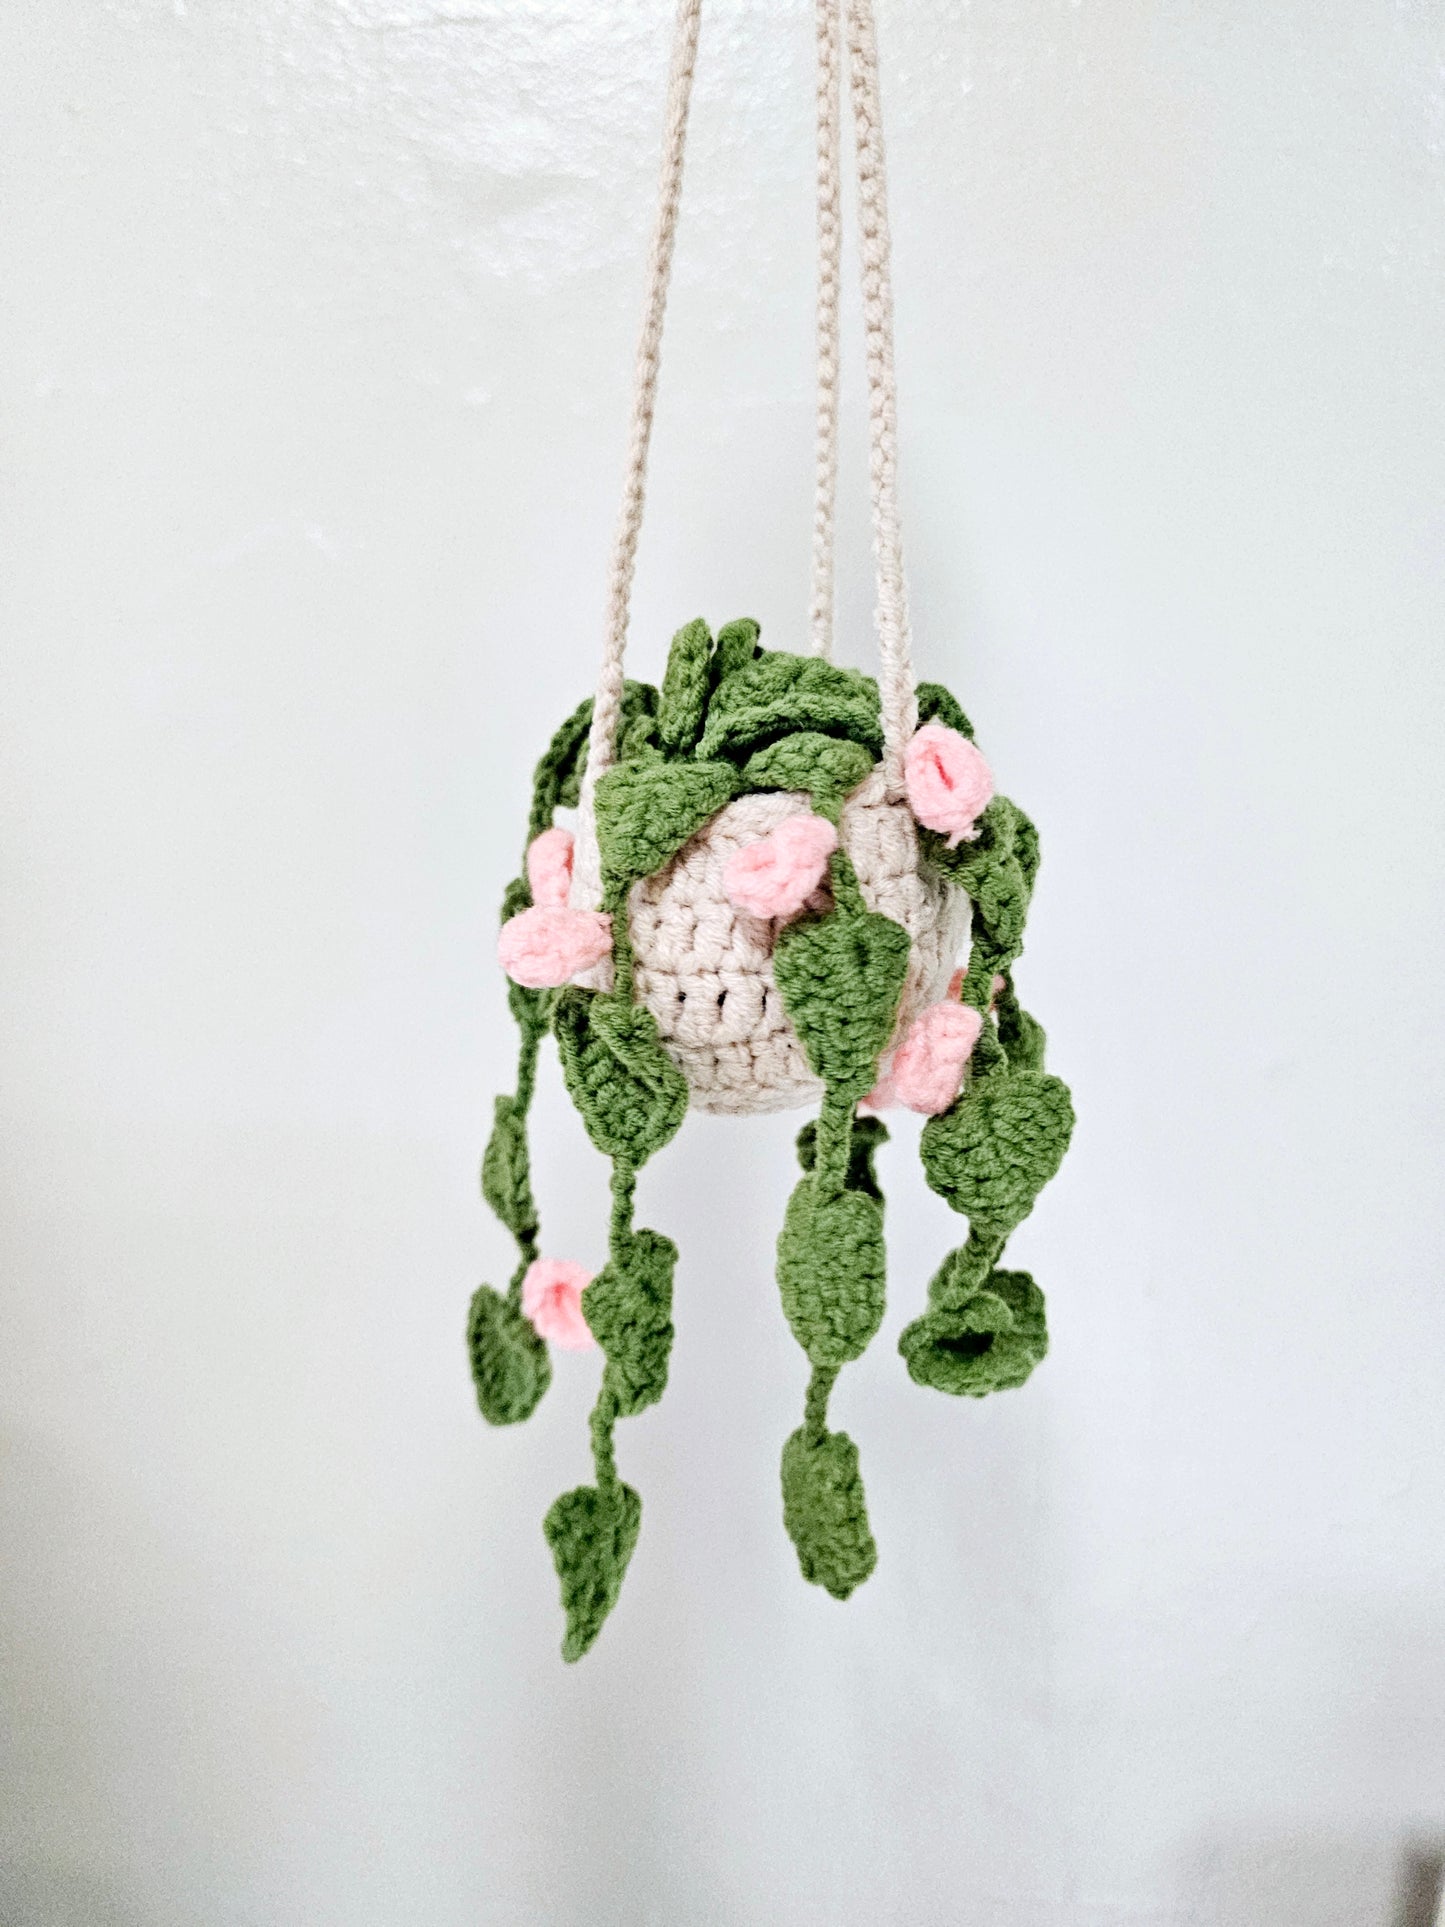 Crochet Plant Hanger with Pink Flowers